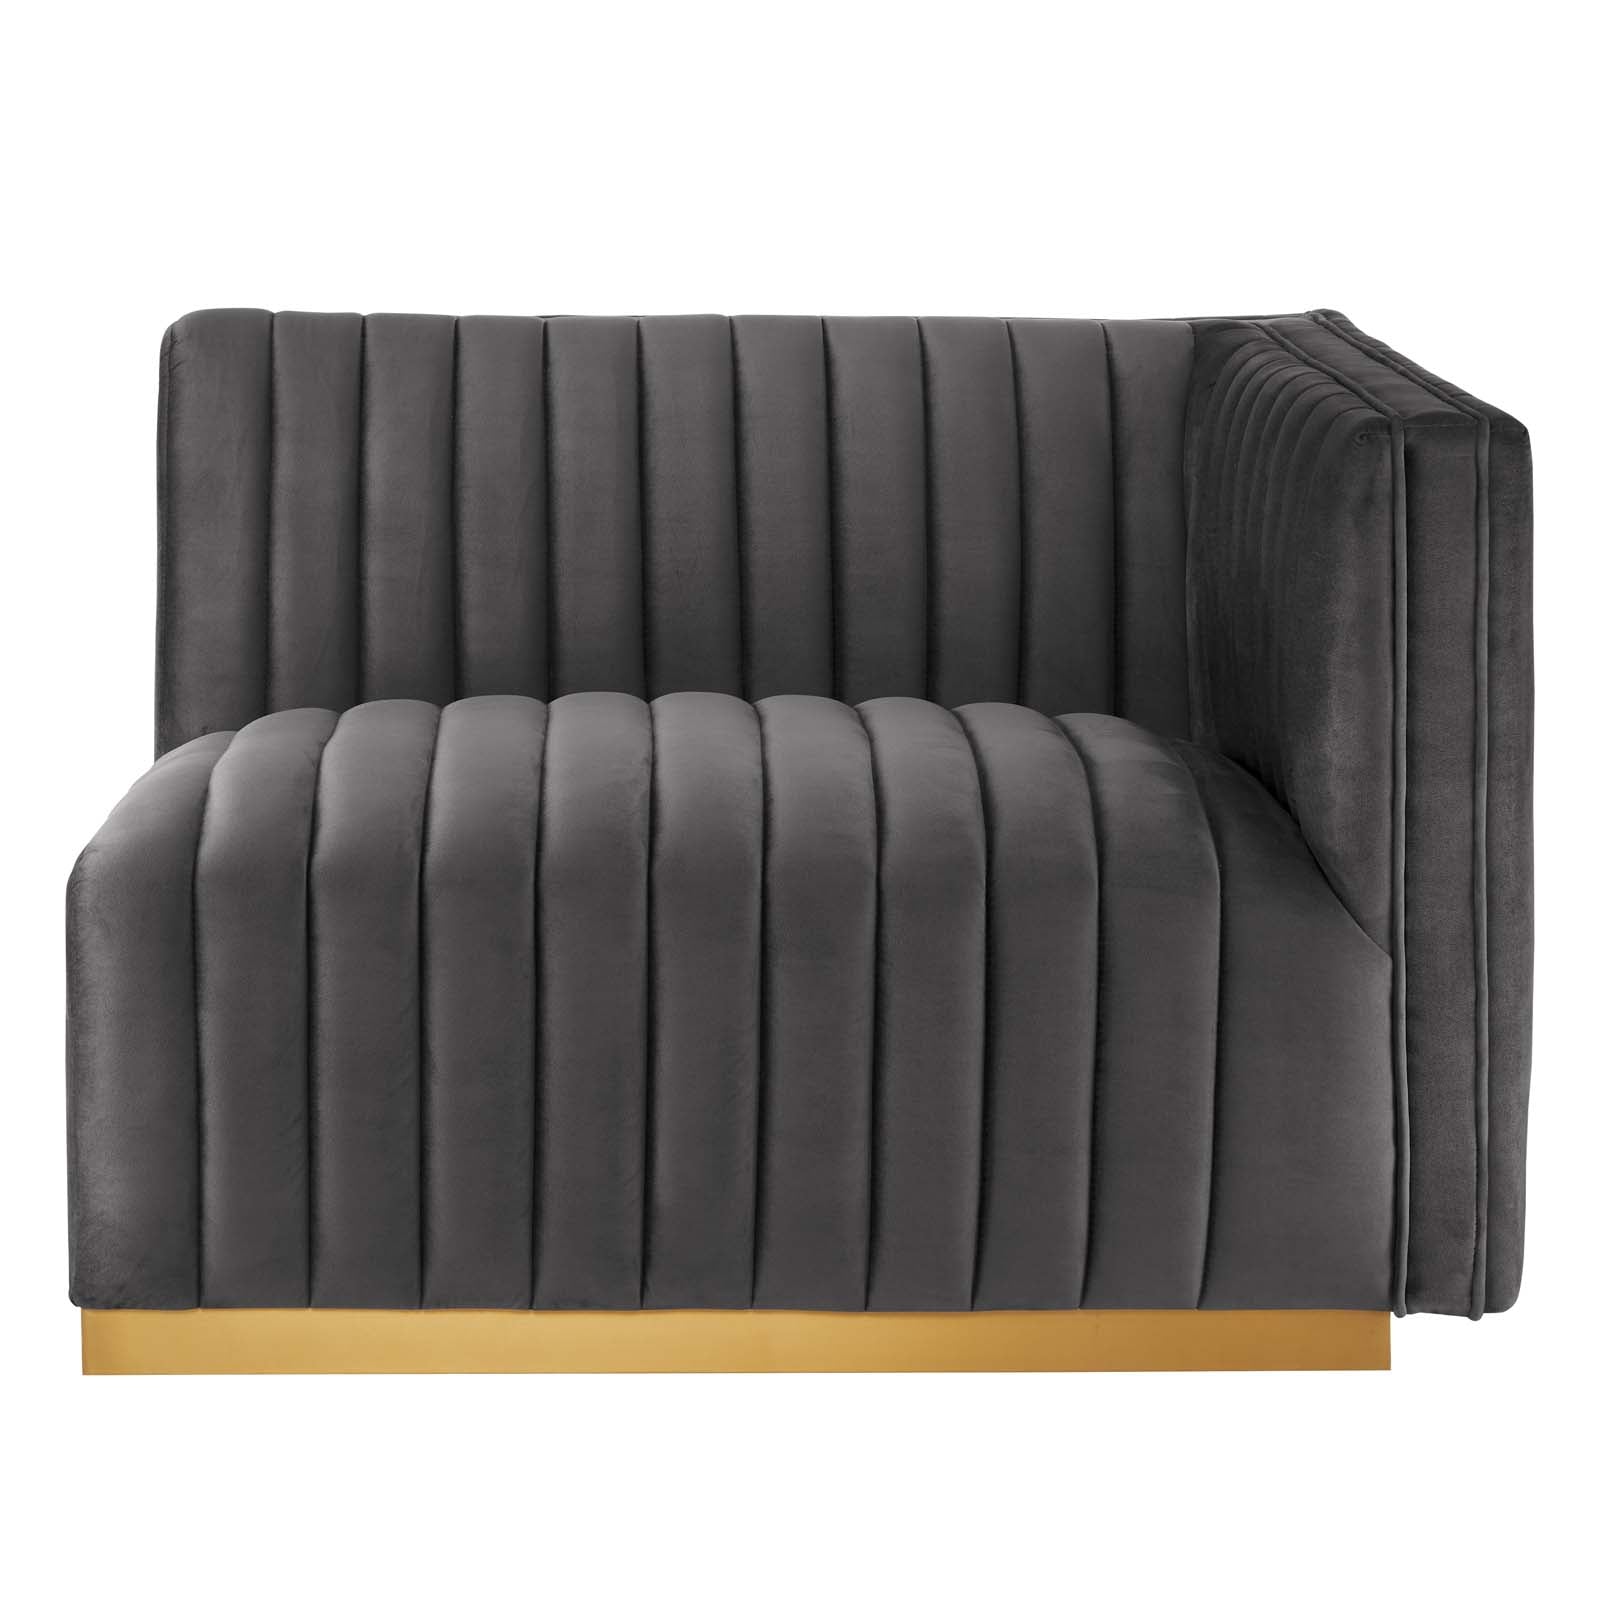 Conjure Channel Tufted Performance Velvet Right-Arm Chair - East Shore Modern Home Furnishings